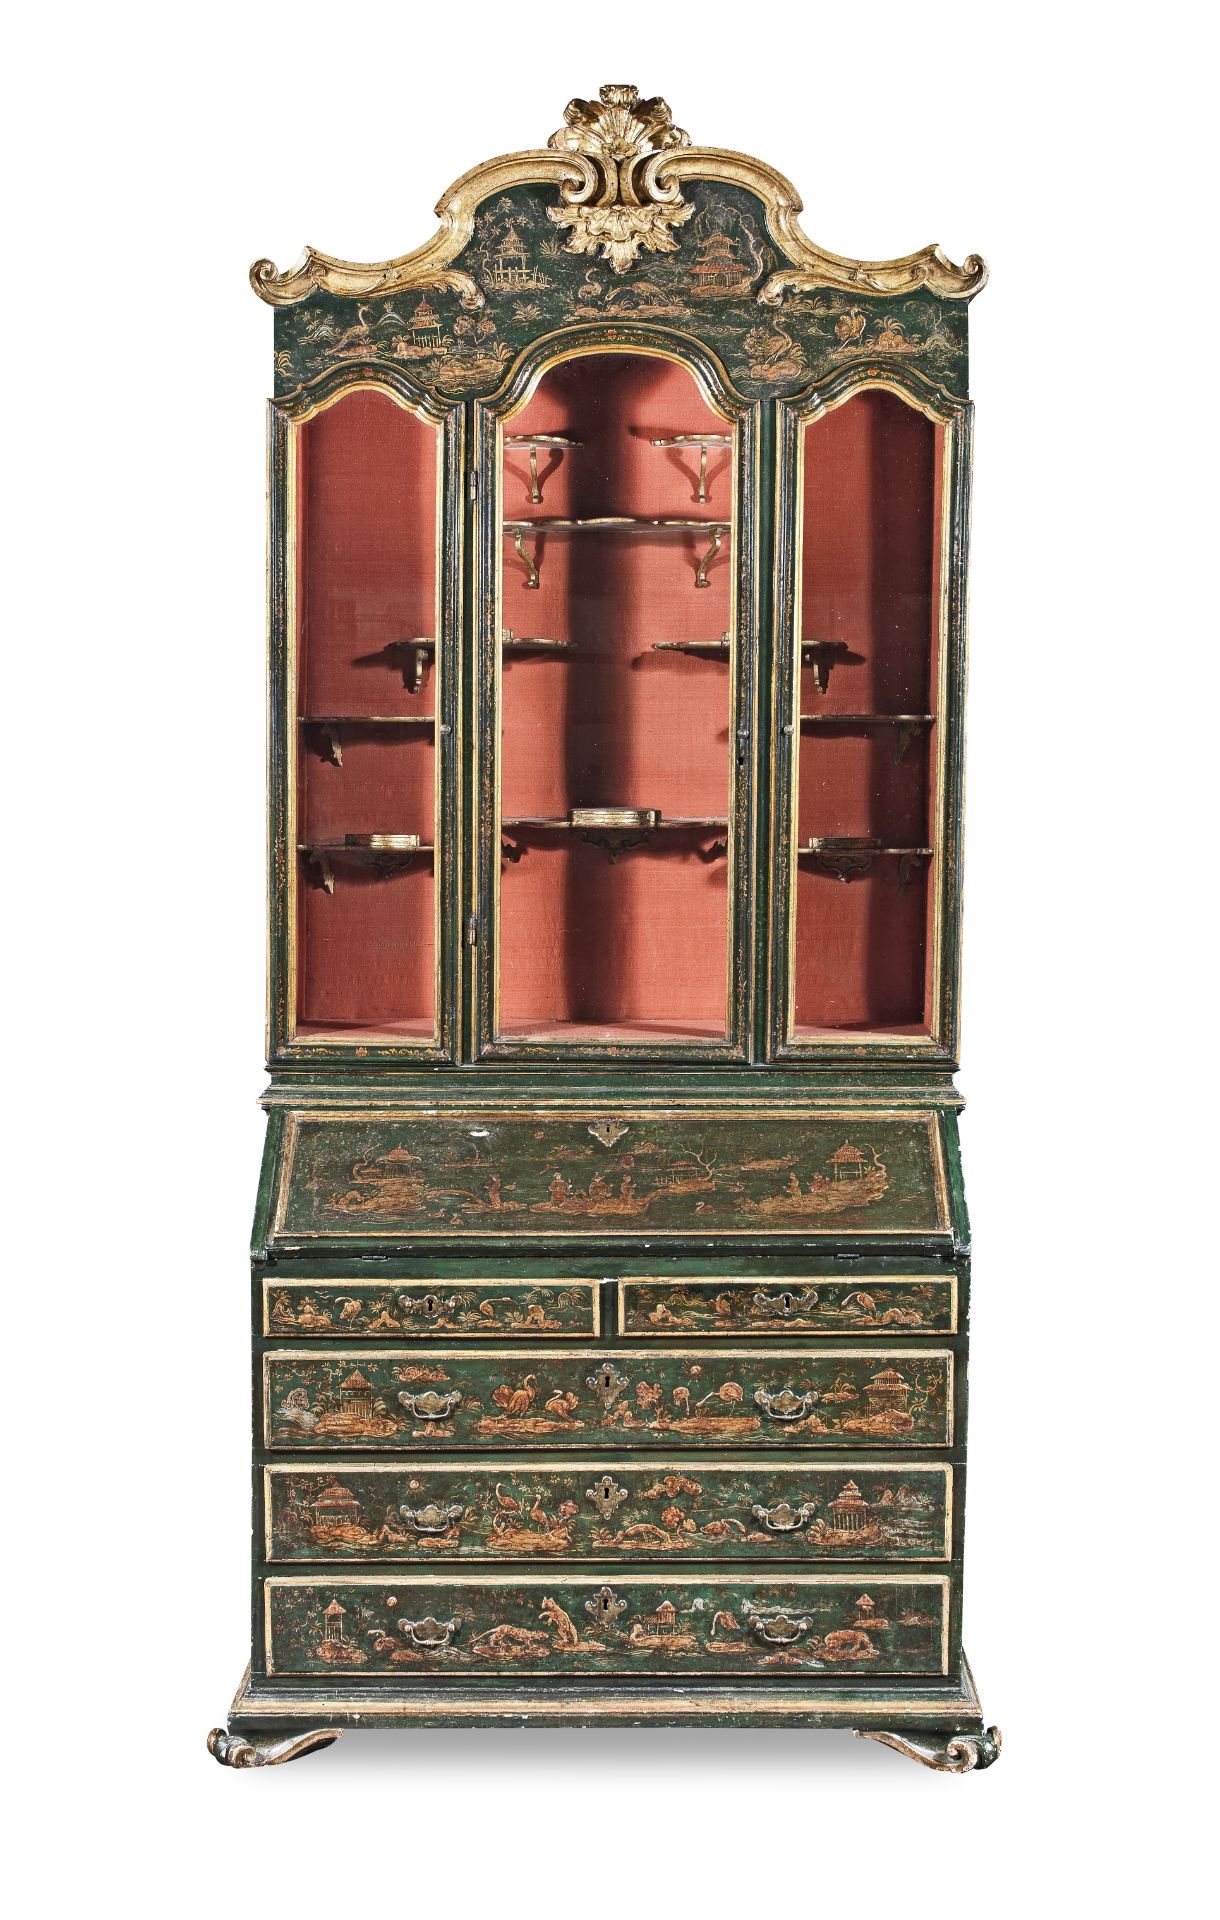 A large Italian 18th century japanned and parcel gilt bureau cabinet almost certainly Venetian, t...